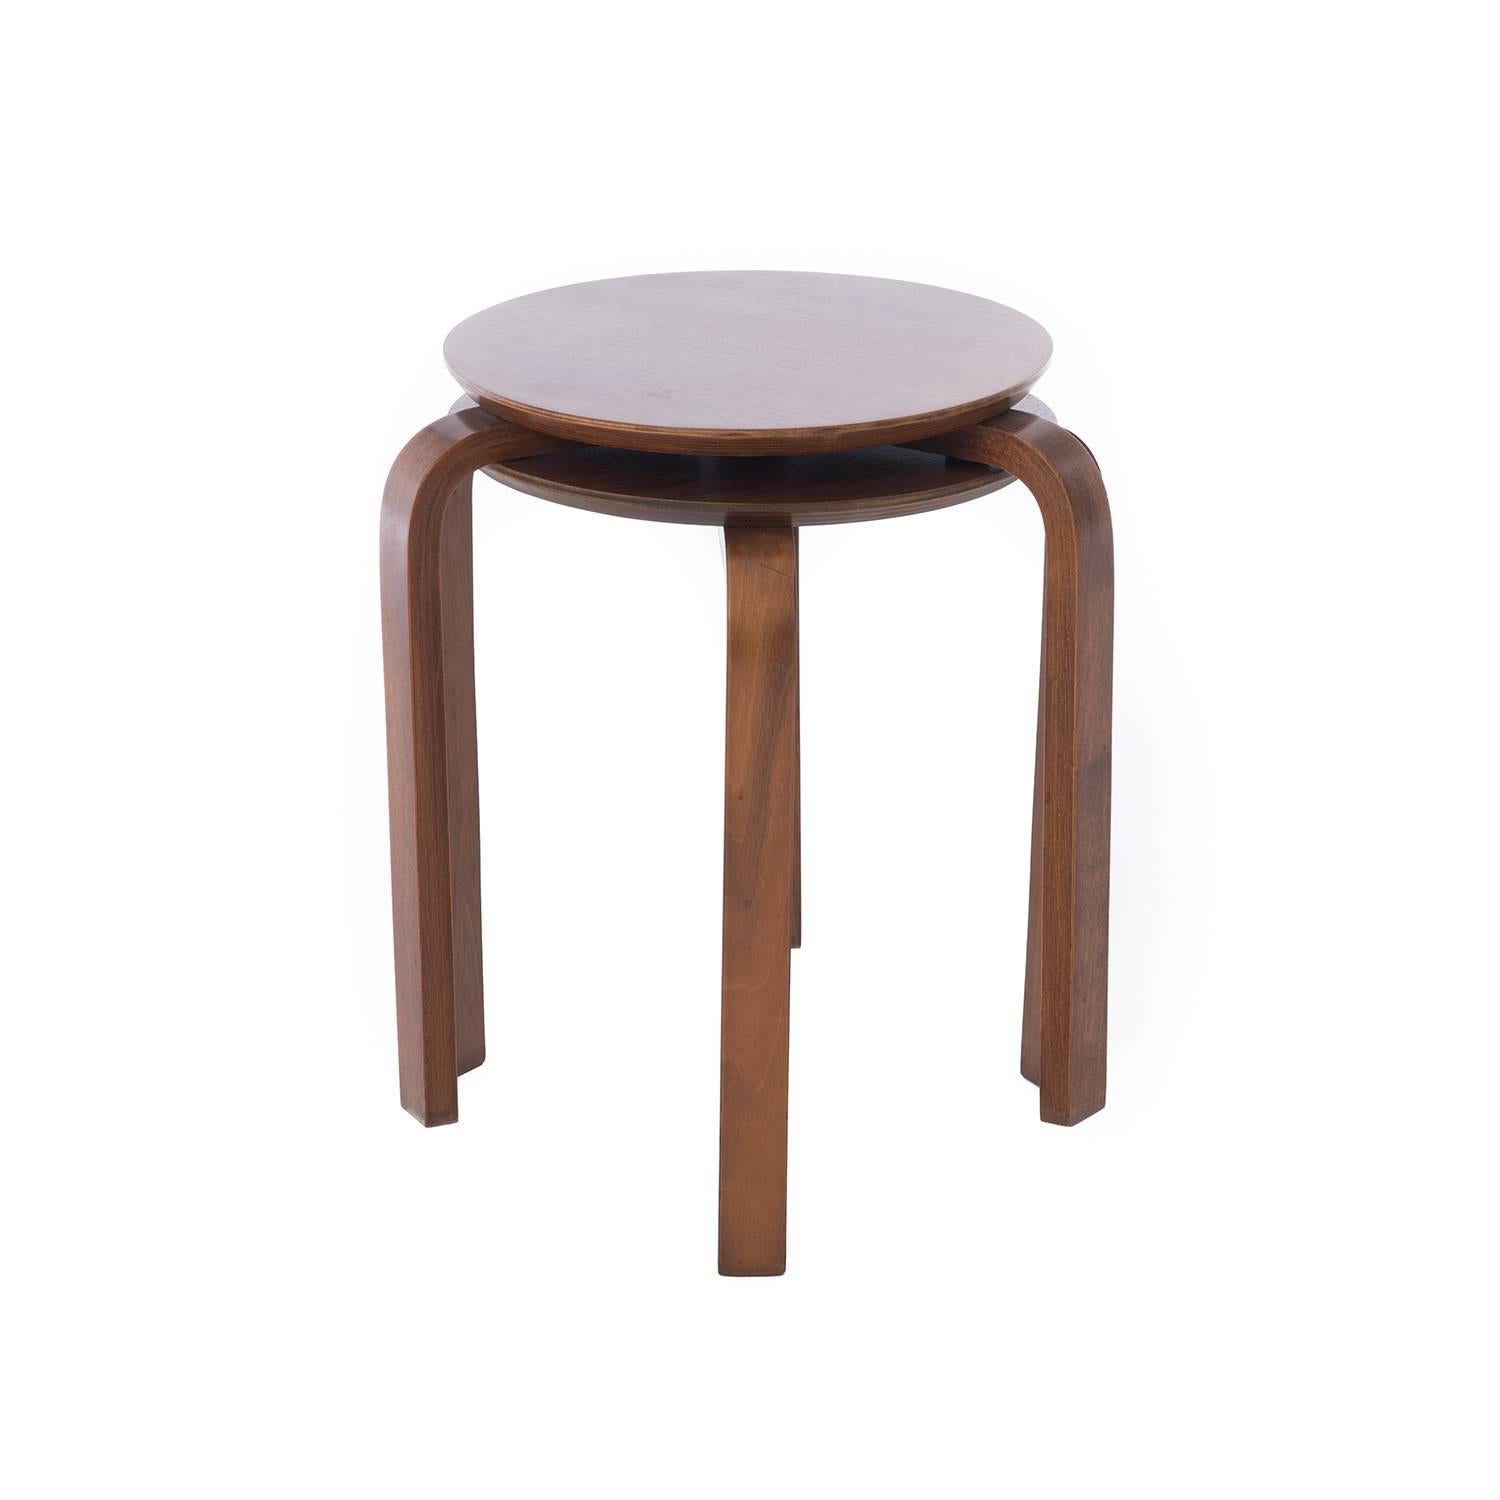 These walnut stacking stools are good looking and functional. Seven available, please inquire about purchasing multiples.

Professional, skilled furniture restoration is an integral part of what we do every day. Our goal is to provide beautiful,